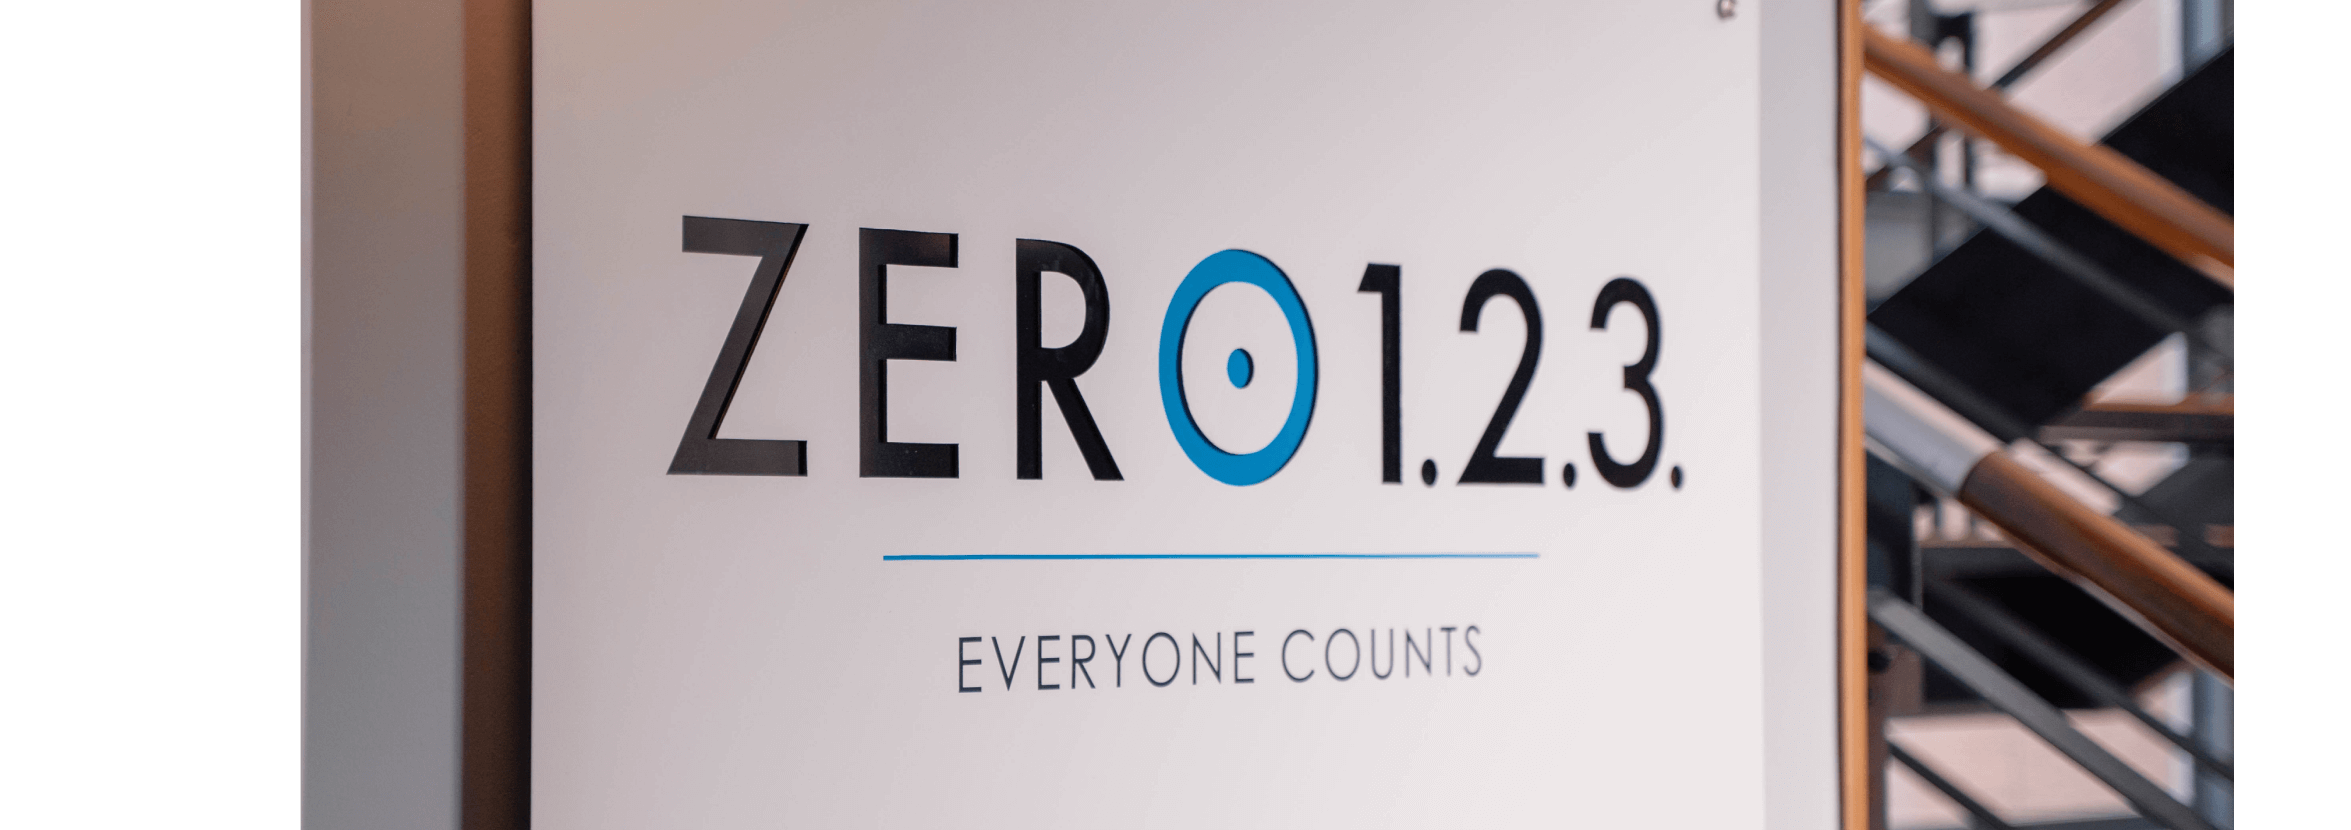 A sign with the words ‘Zero 1.2.3. Everyone counts’ on it.